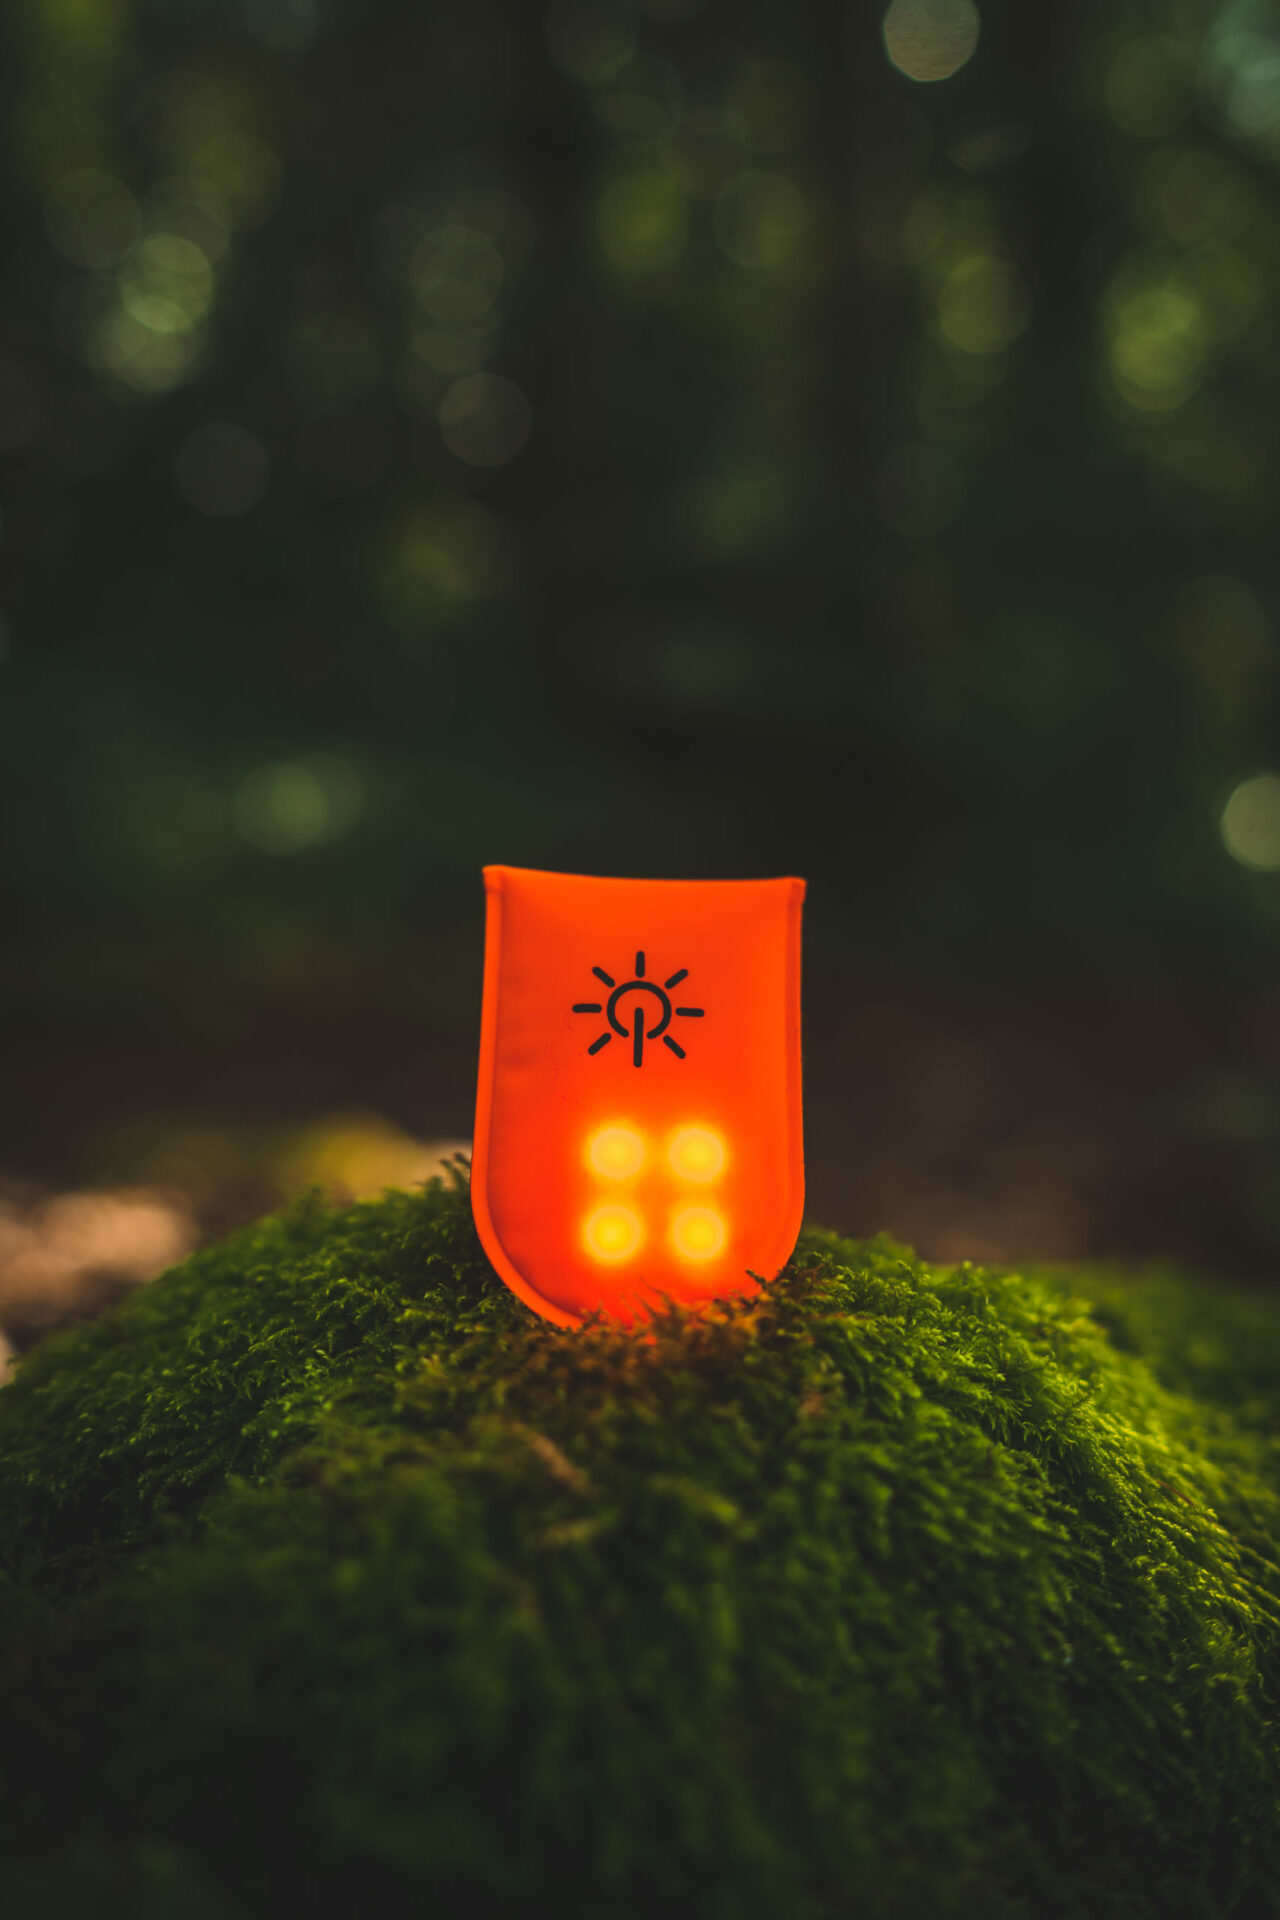 A wearable safety illumination device by FHOSS, the Mag Light, resting on a grass mound.